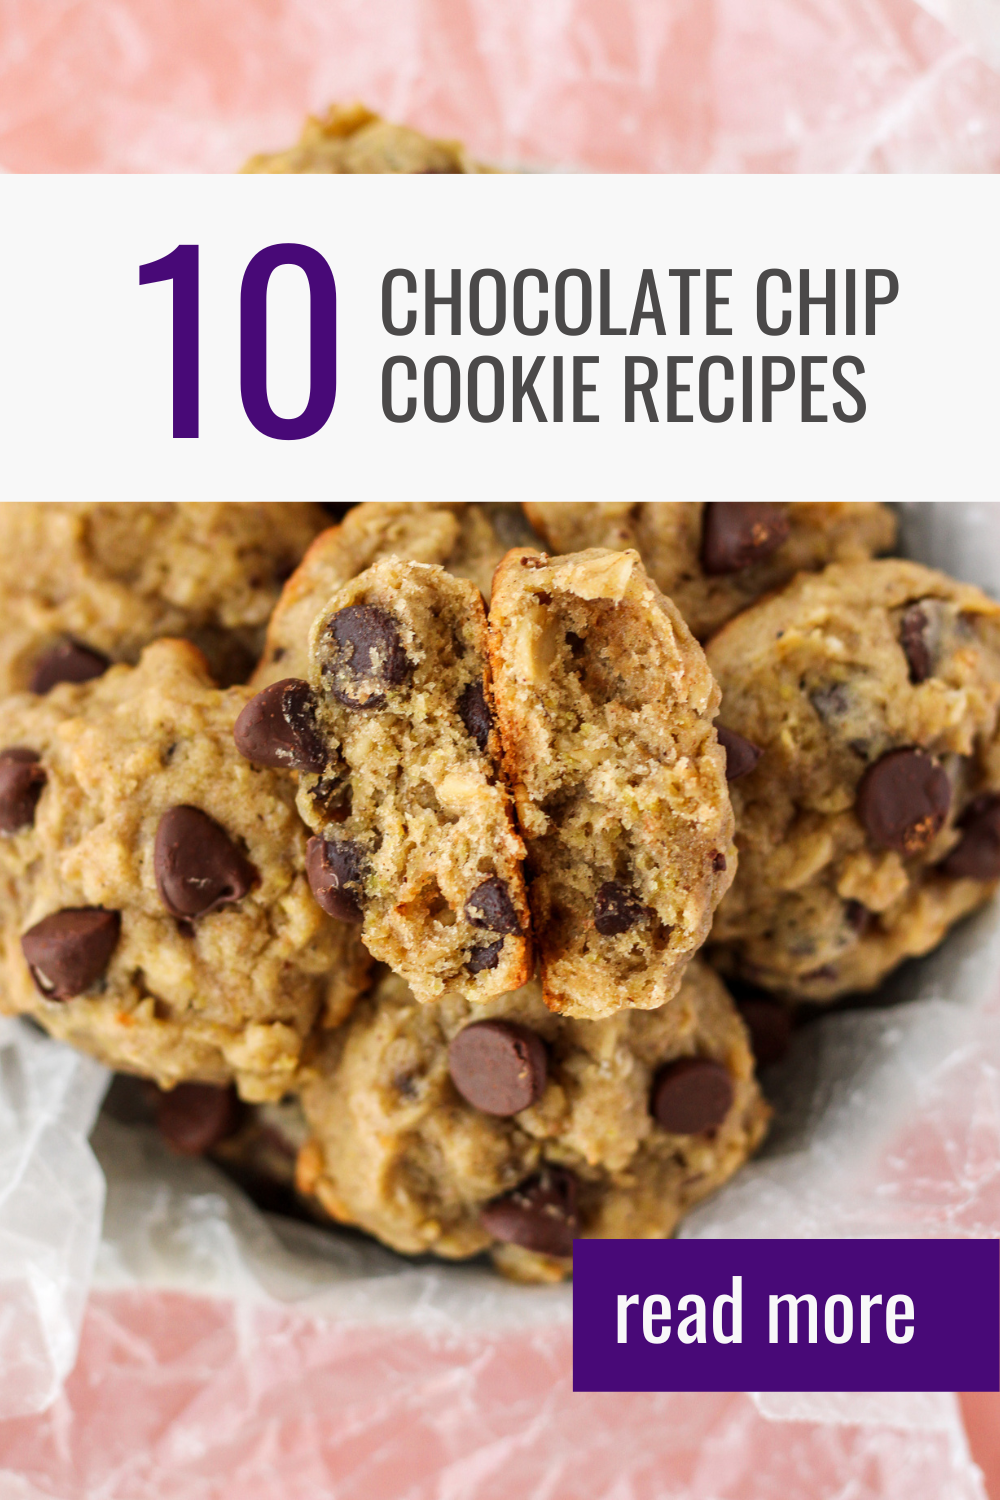 10 Chocolate Chip Cookie Recipes | Bakes & Blunders